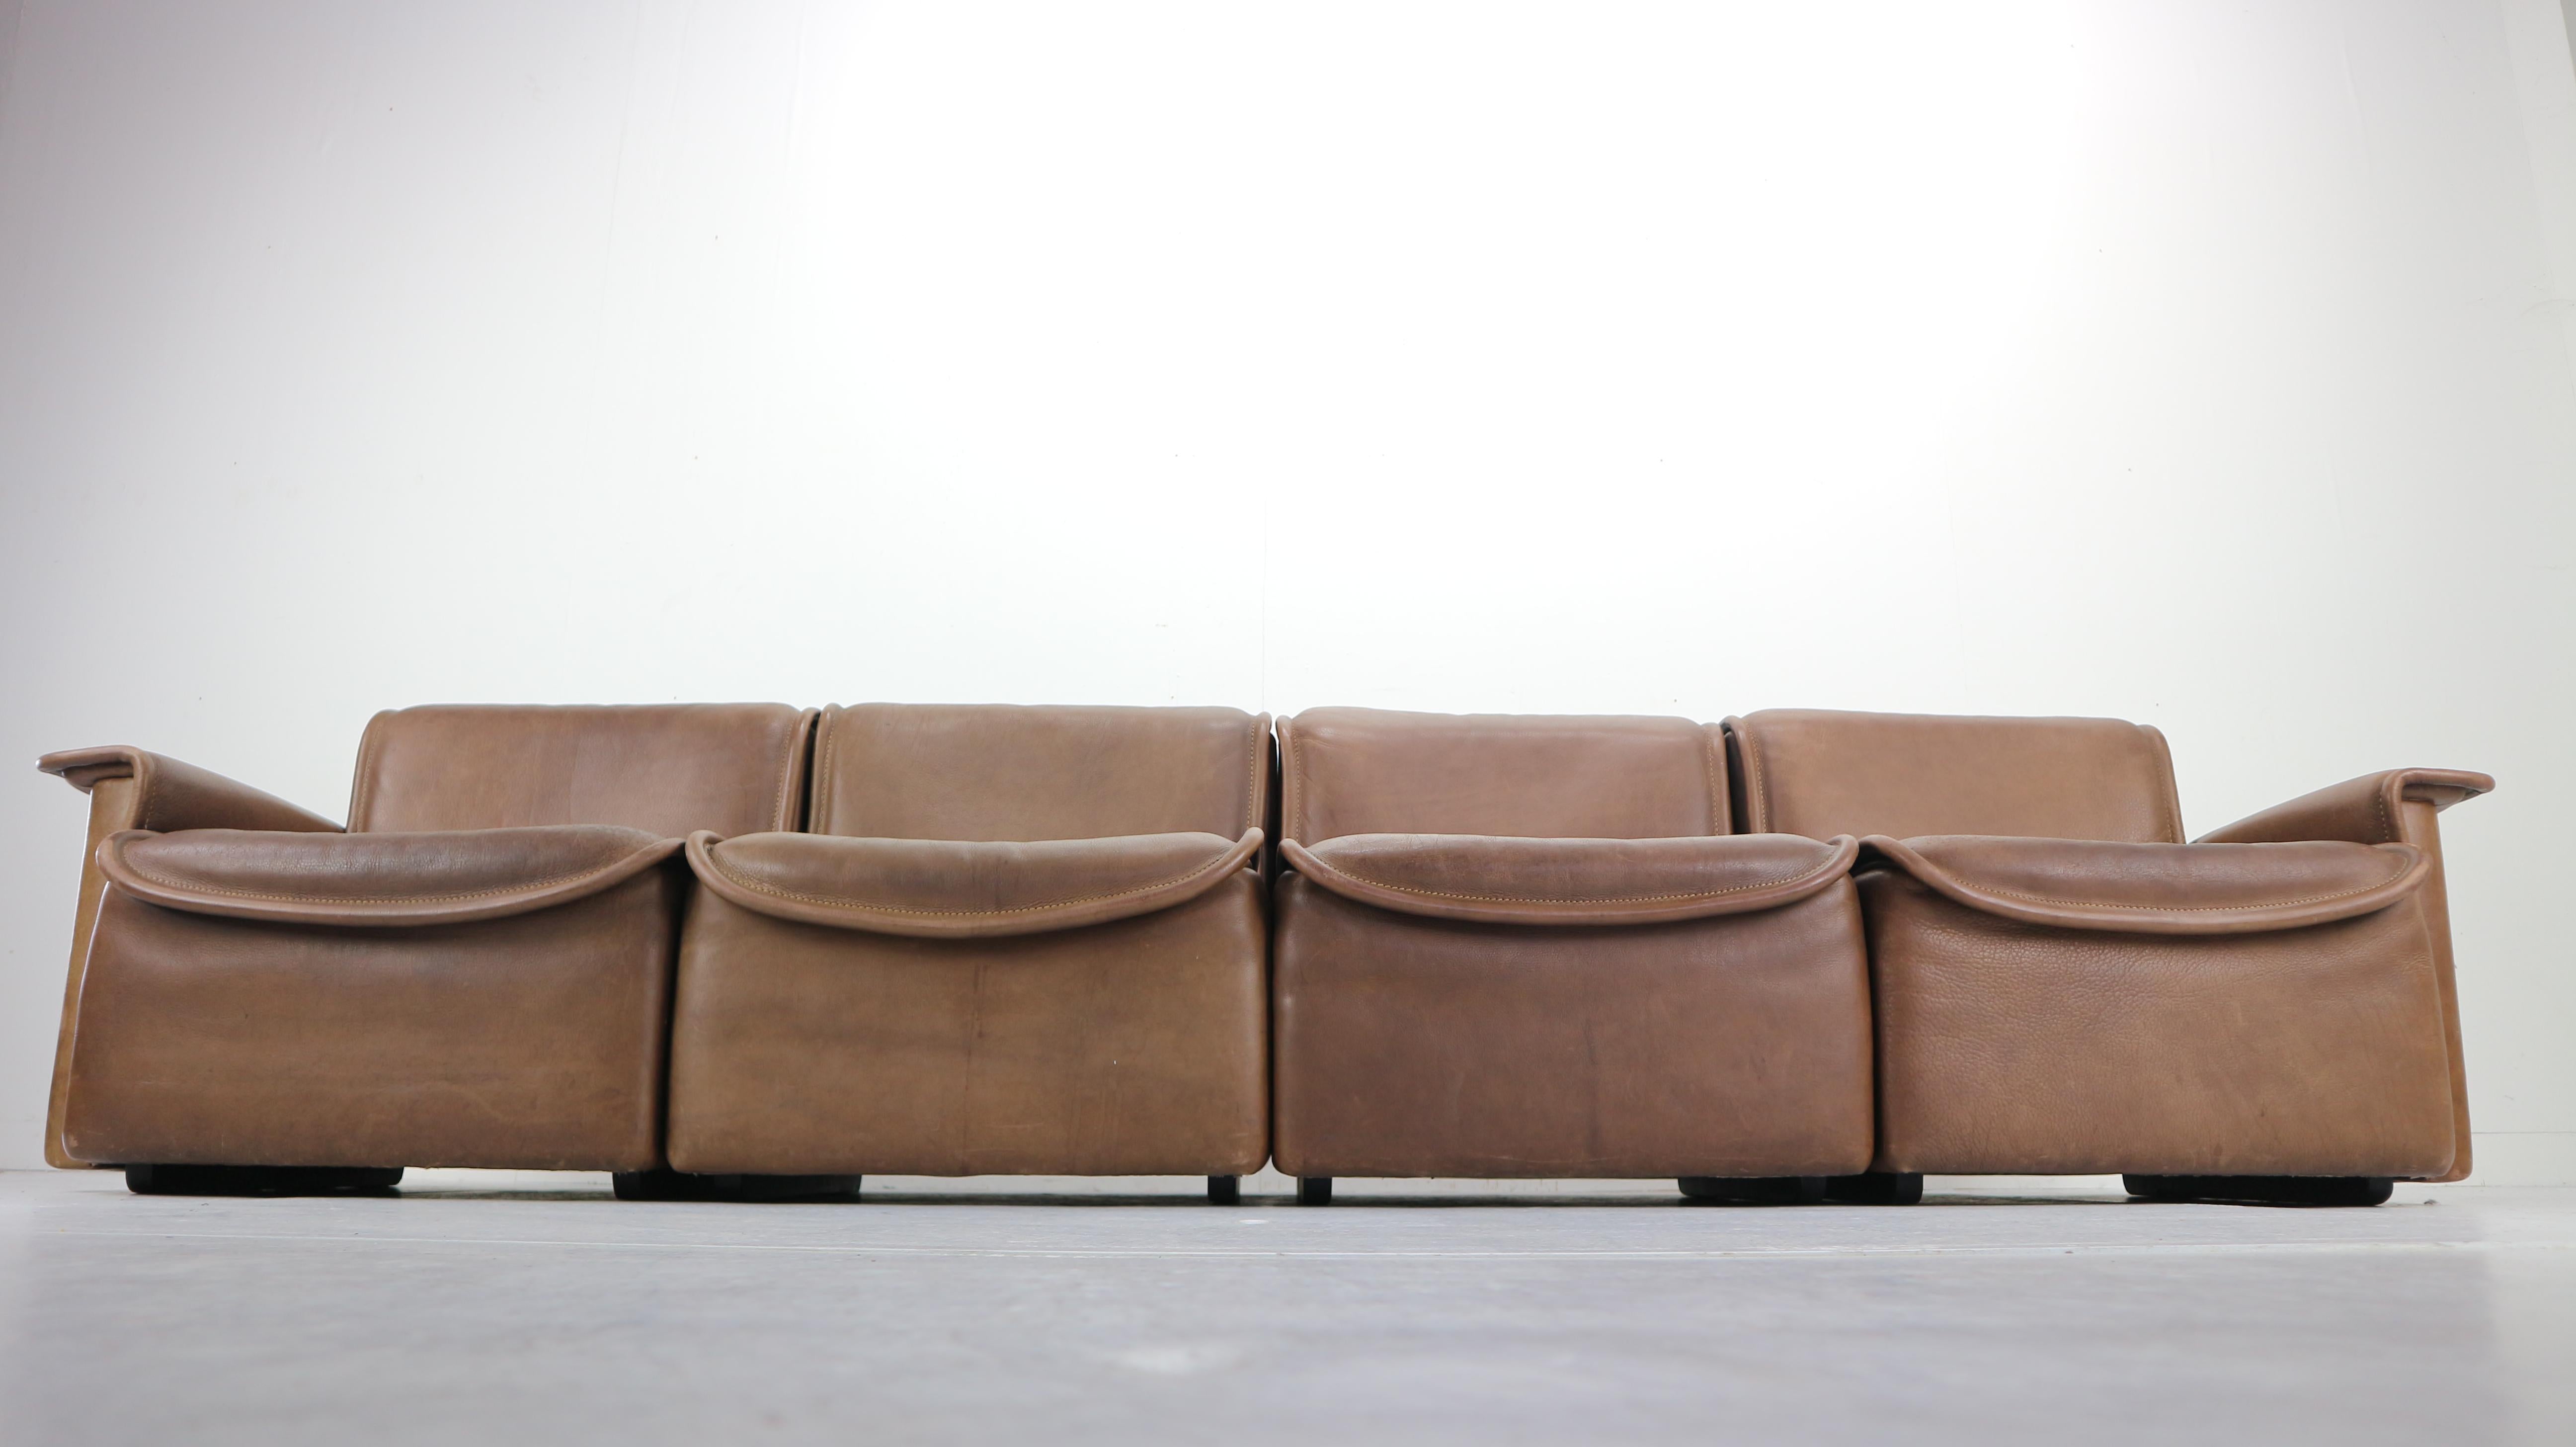 Rare four-seat sofa model DS-12 designed by design team at De Sede. Produced by De Sede in Switzerland in 1970s.
The sofa seating is made of thick brown leather and consists of four easily movable peaces.
Scandinavian Modern design.

 